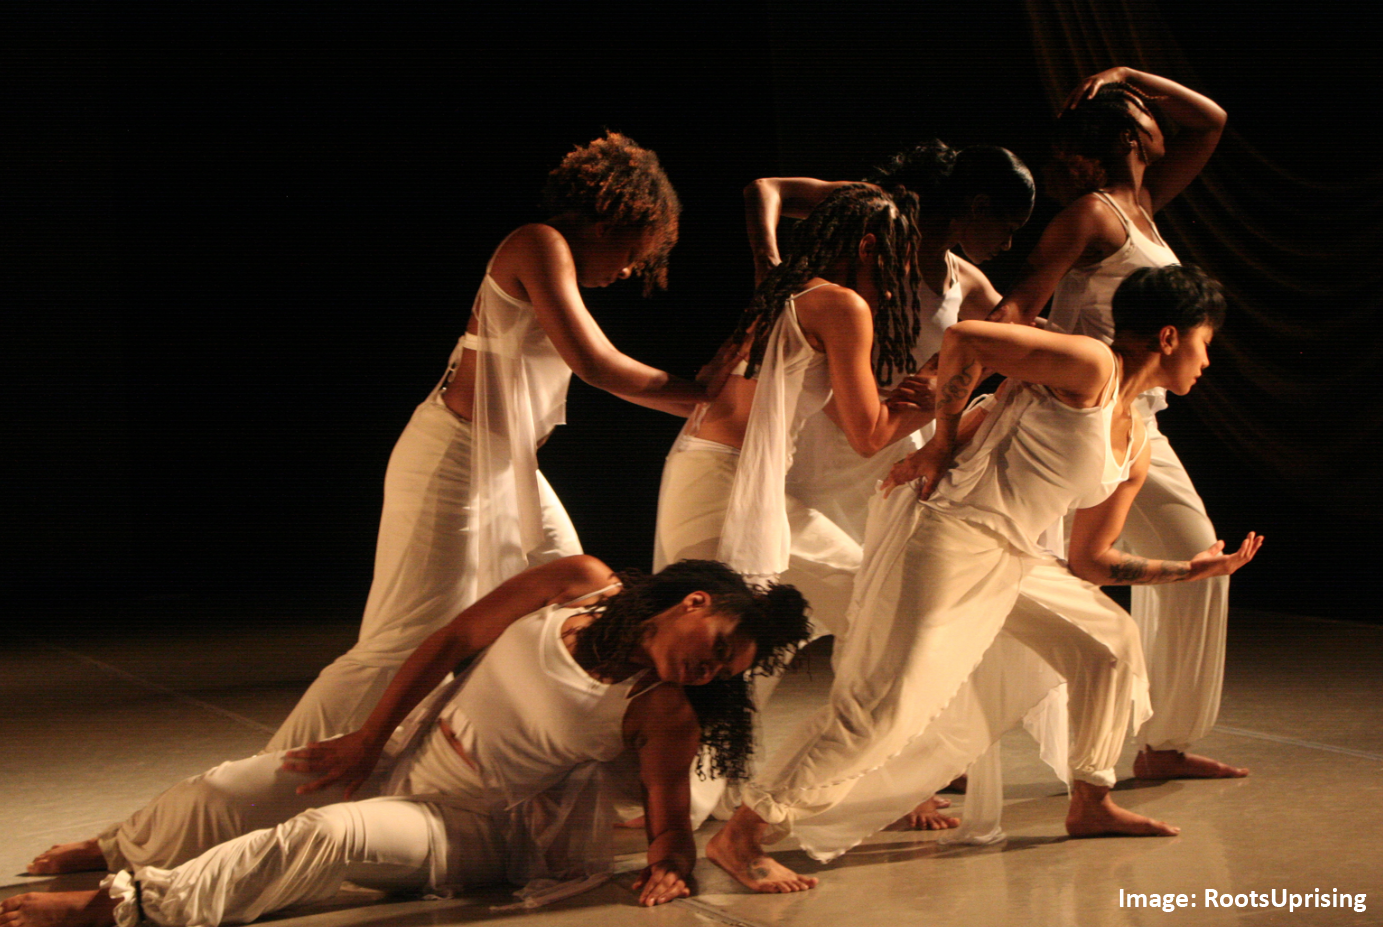 Group of dancers on stage in all white make shapes with their bodies and look towards stage left.